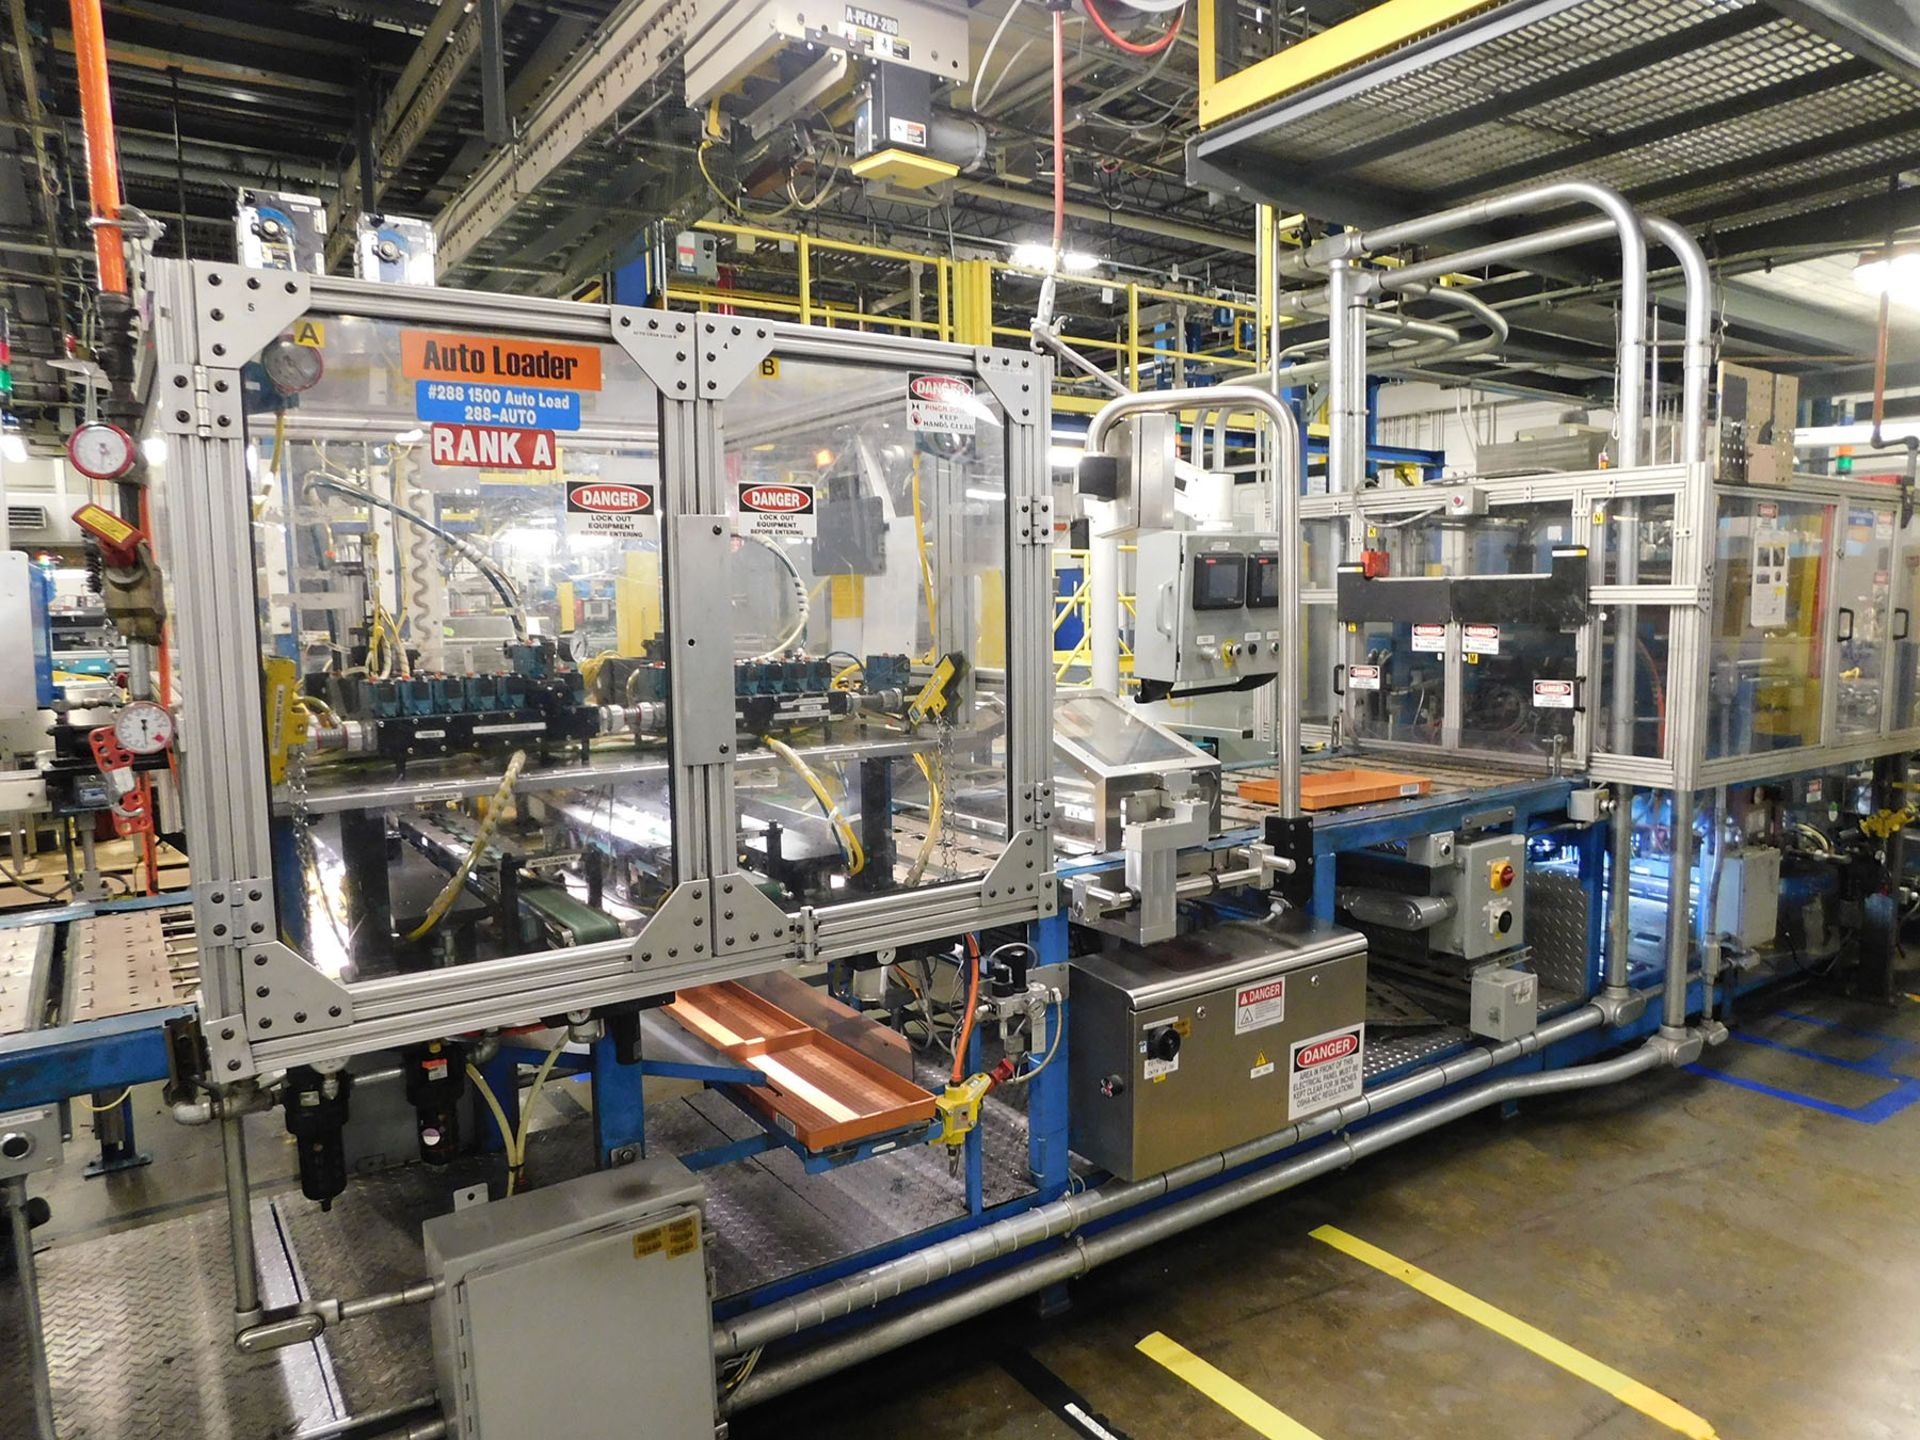 AA DURACELL BLISTER PACK LINE WITH FOLD OVER CASE PACKER, MOTORIZED ROLLER CONVEYOR AND ELEVATOR